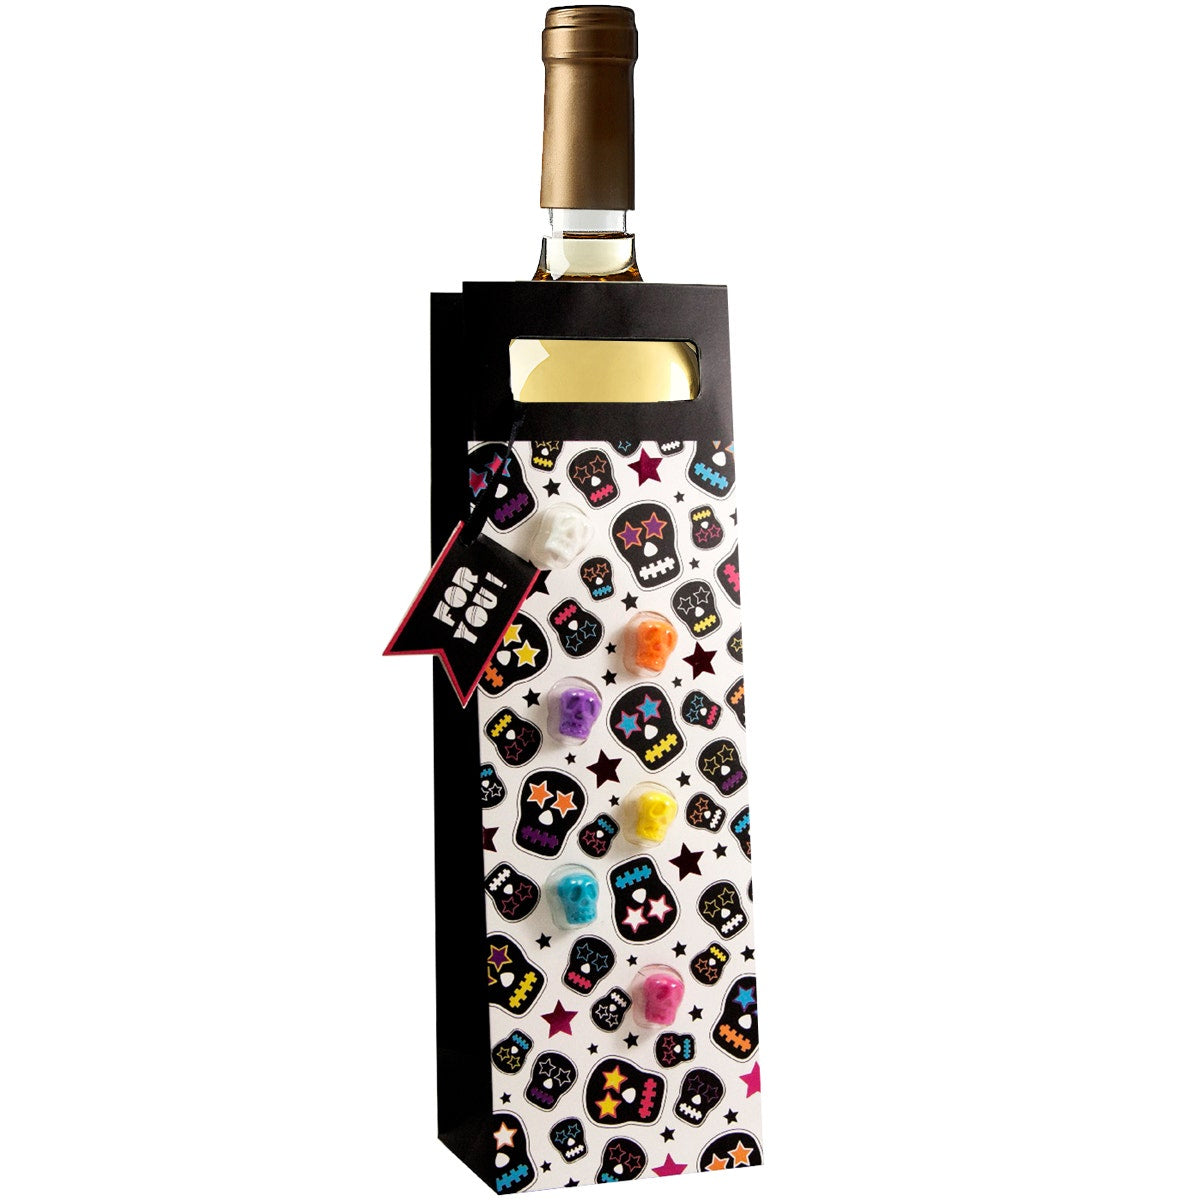 Wine Bottle Gift Bag Set With 6 Silicone Charm Wine Glass Markers